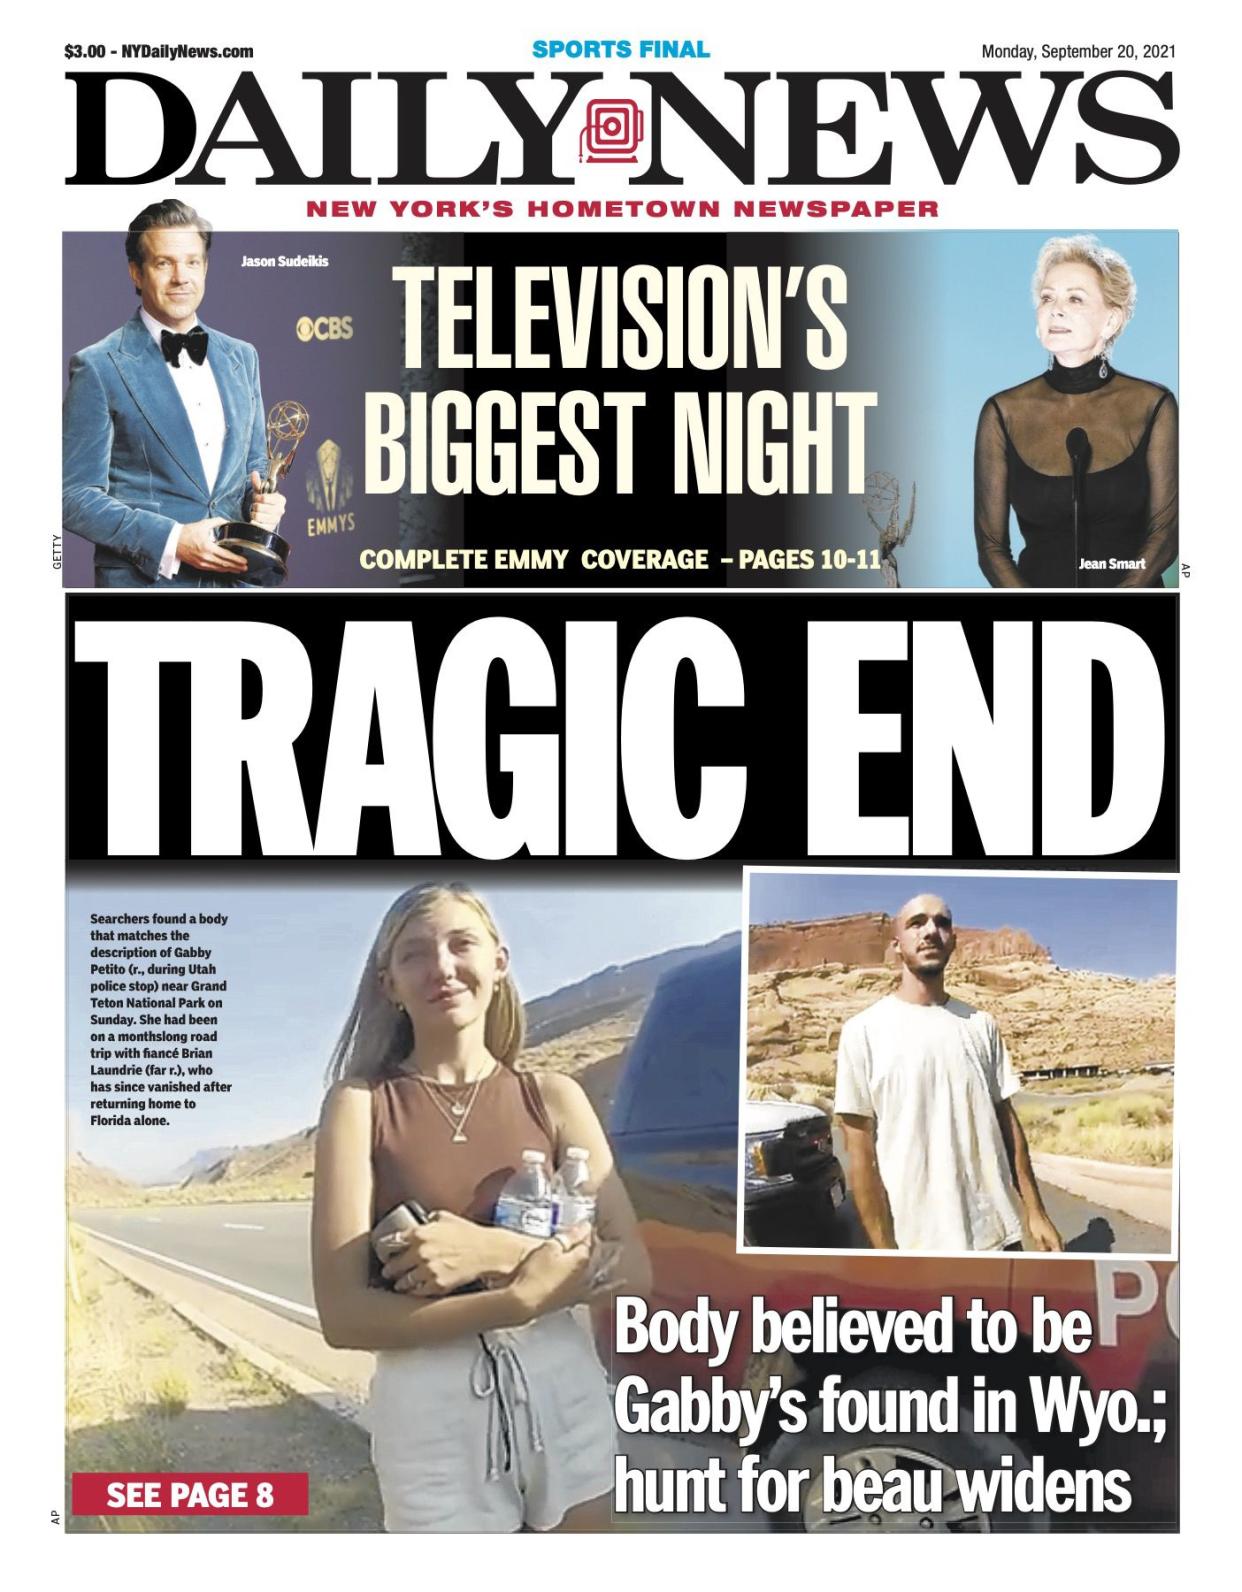 The Daily News front page for Sept. 20, 2021, after Gabby Petito's body was found in Wyoming.